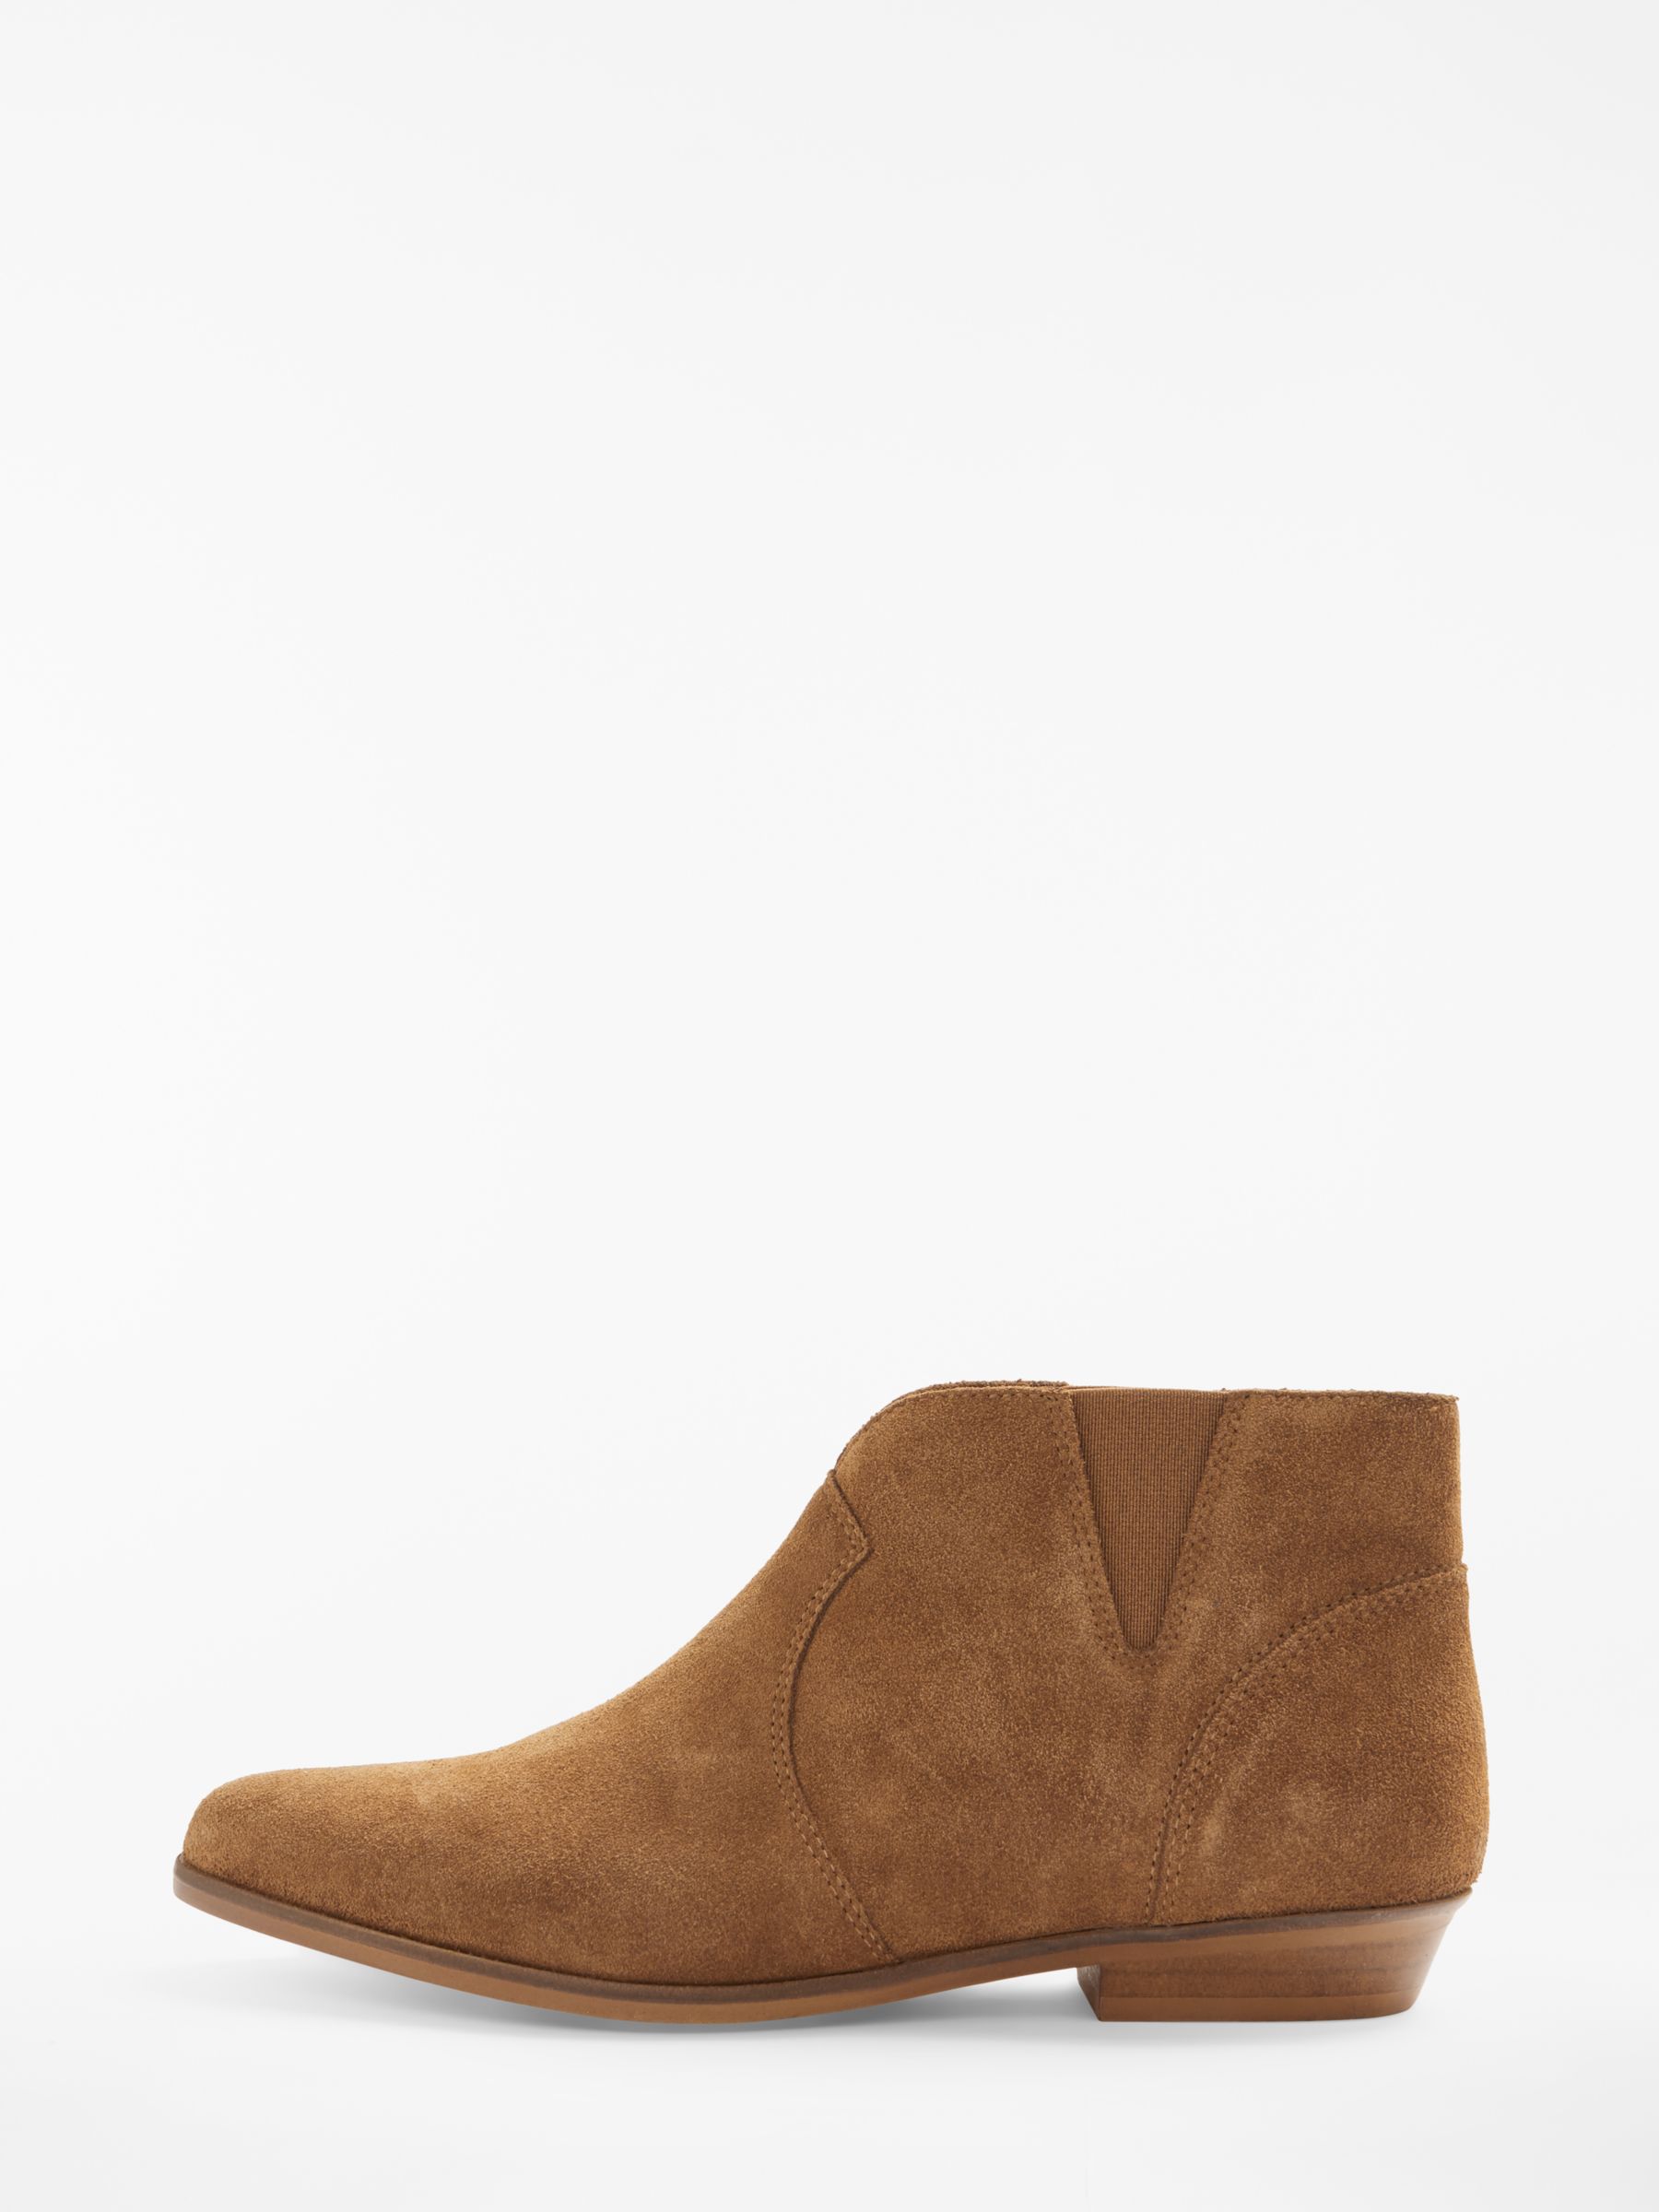 womens tan suede ankle boots